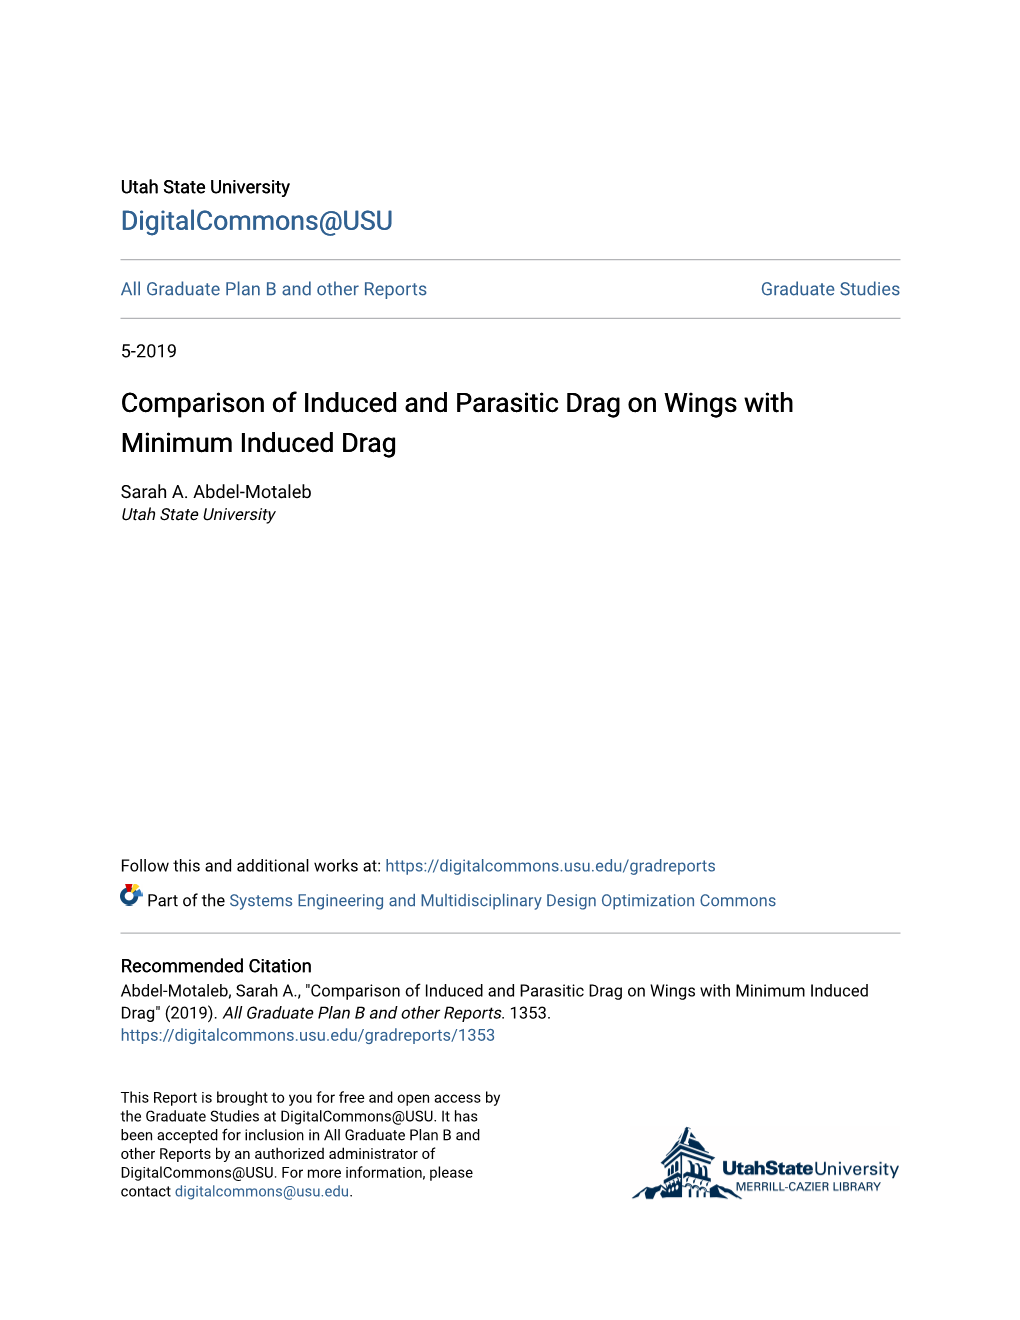 Comparison of Induced and Parasitic Drag on Wings with Minimum Induced Drag